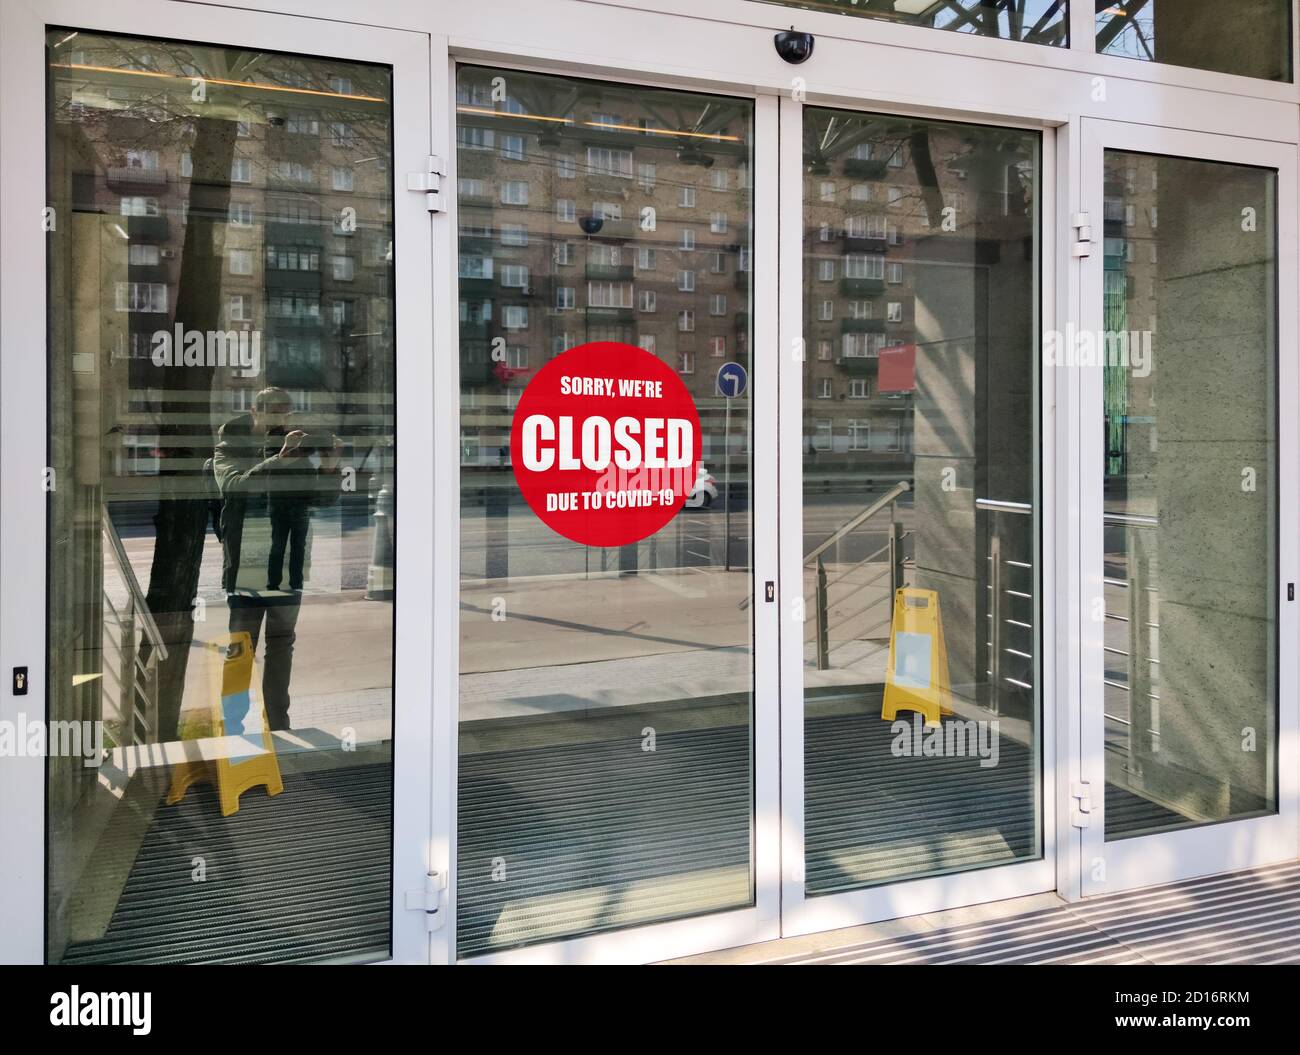 Office building closed due to COVID-19, sign with sorry in street door. Stores, restaurants, other places closed during coronavirus pandemic. Concept Stock Photo